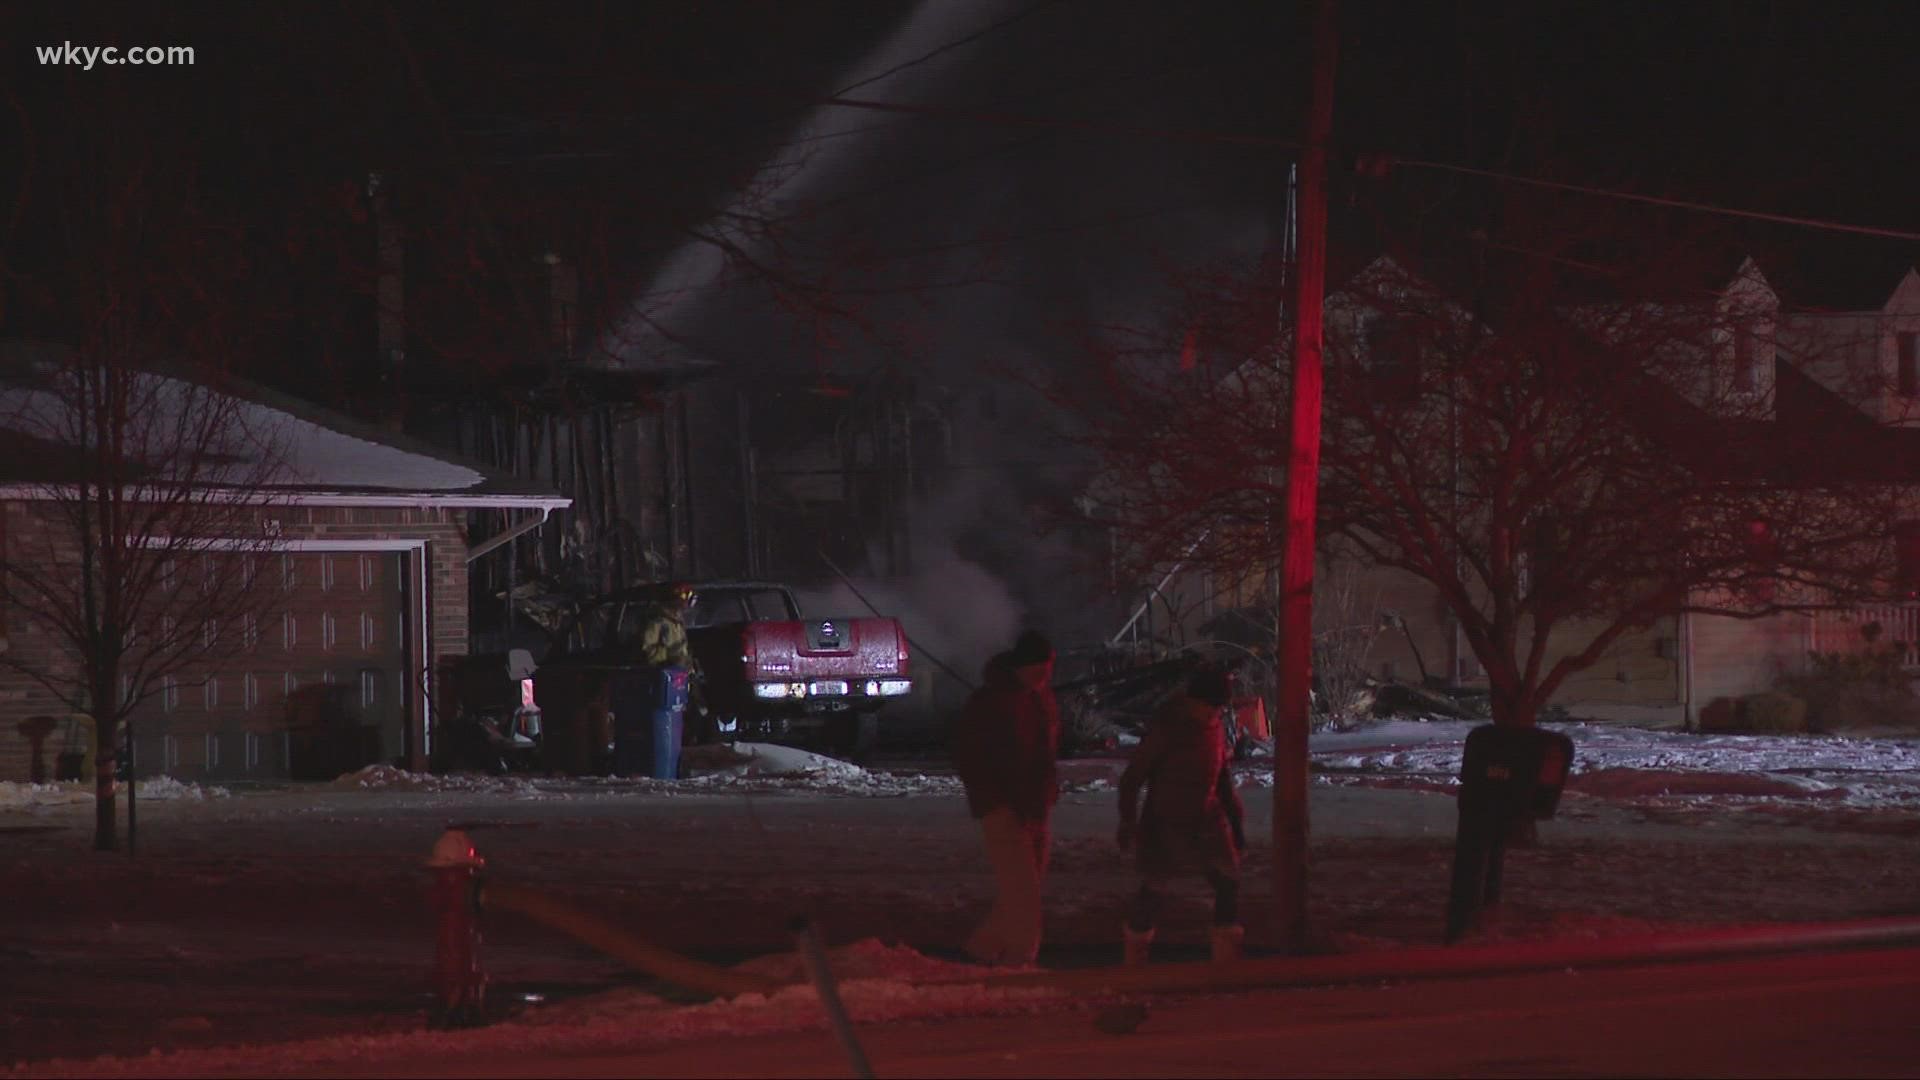 Crews managed to get the blaze under control by 7:30 p.m. Saturday. The house was a total loss.